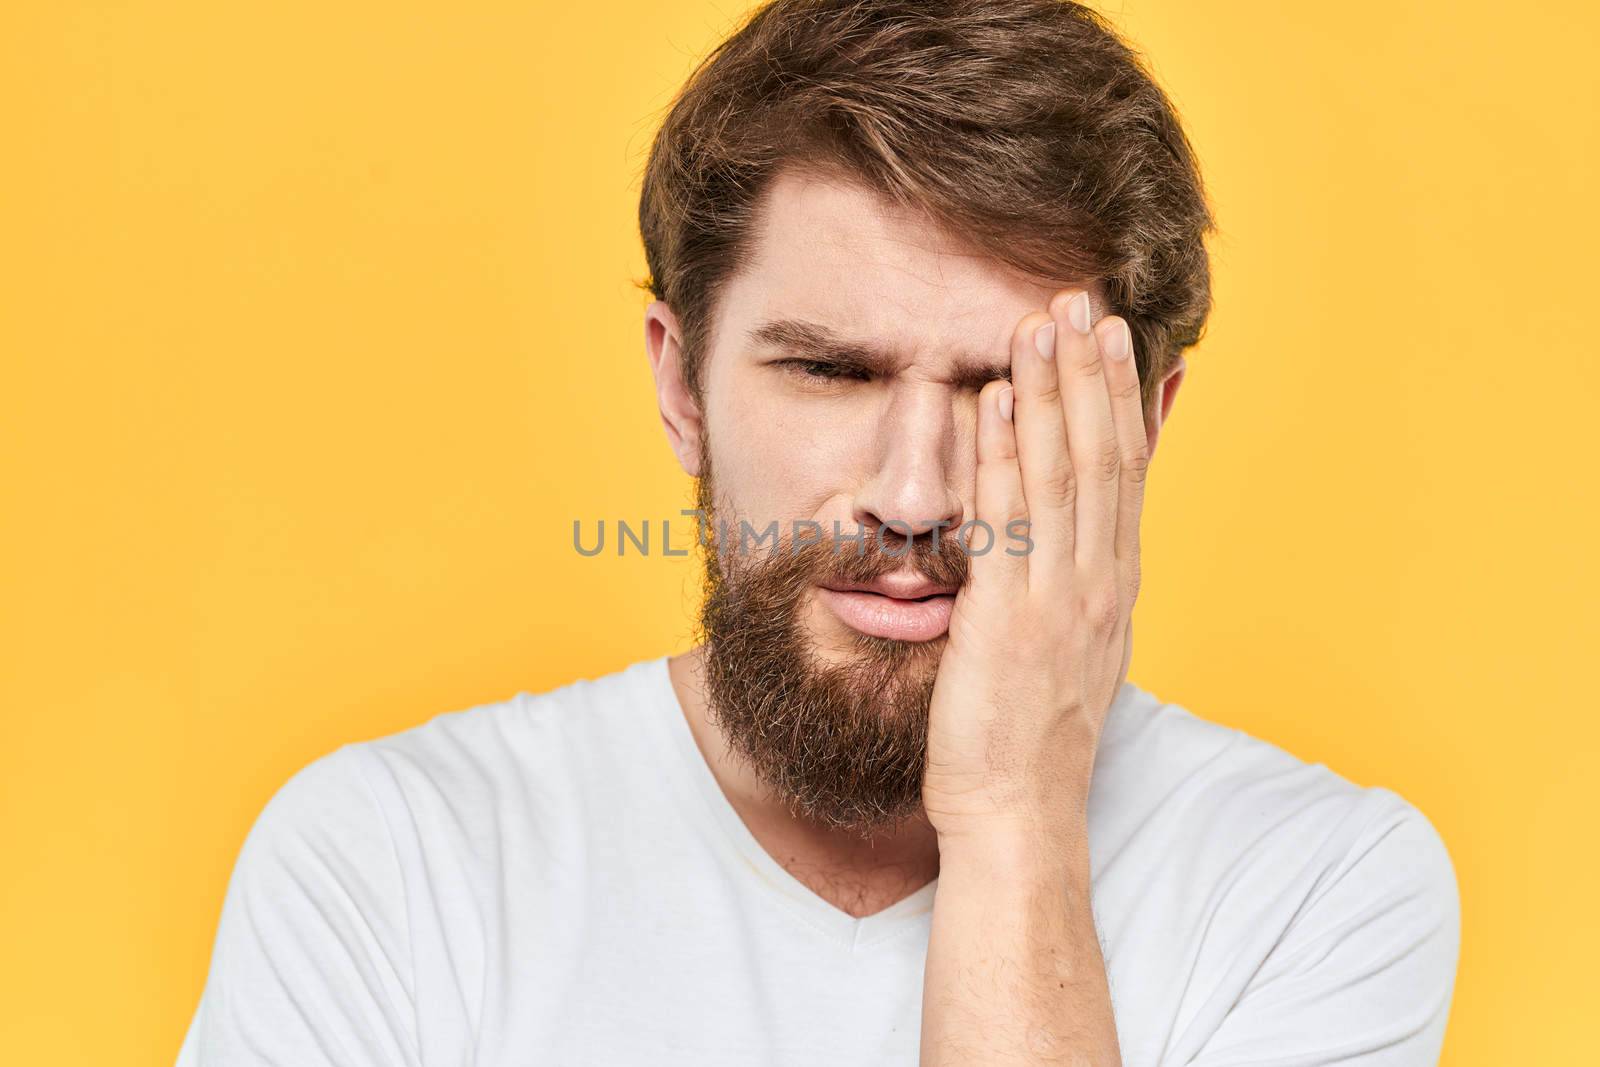 Man in white t-shirt emotions studio gestures with hands displeased facial expression yellow background. High quality photo